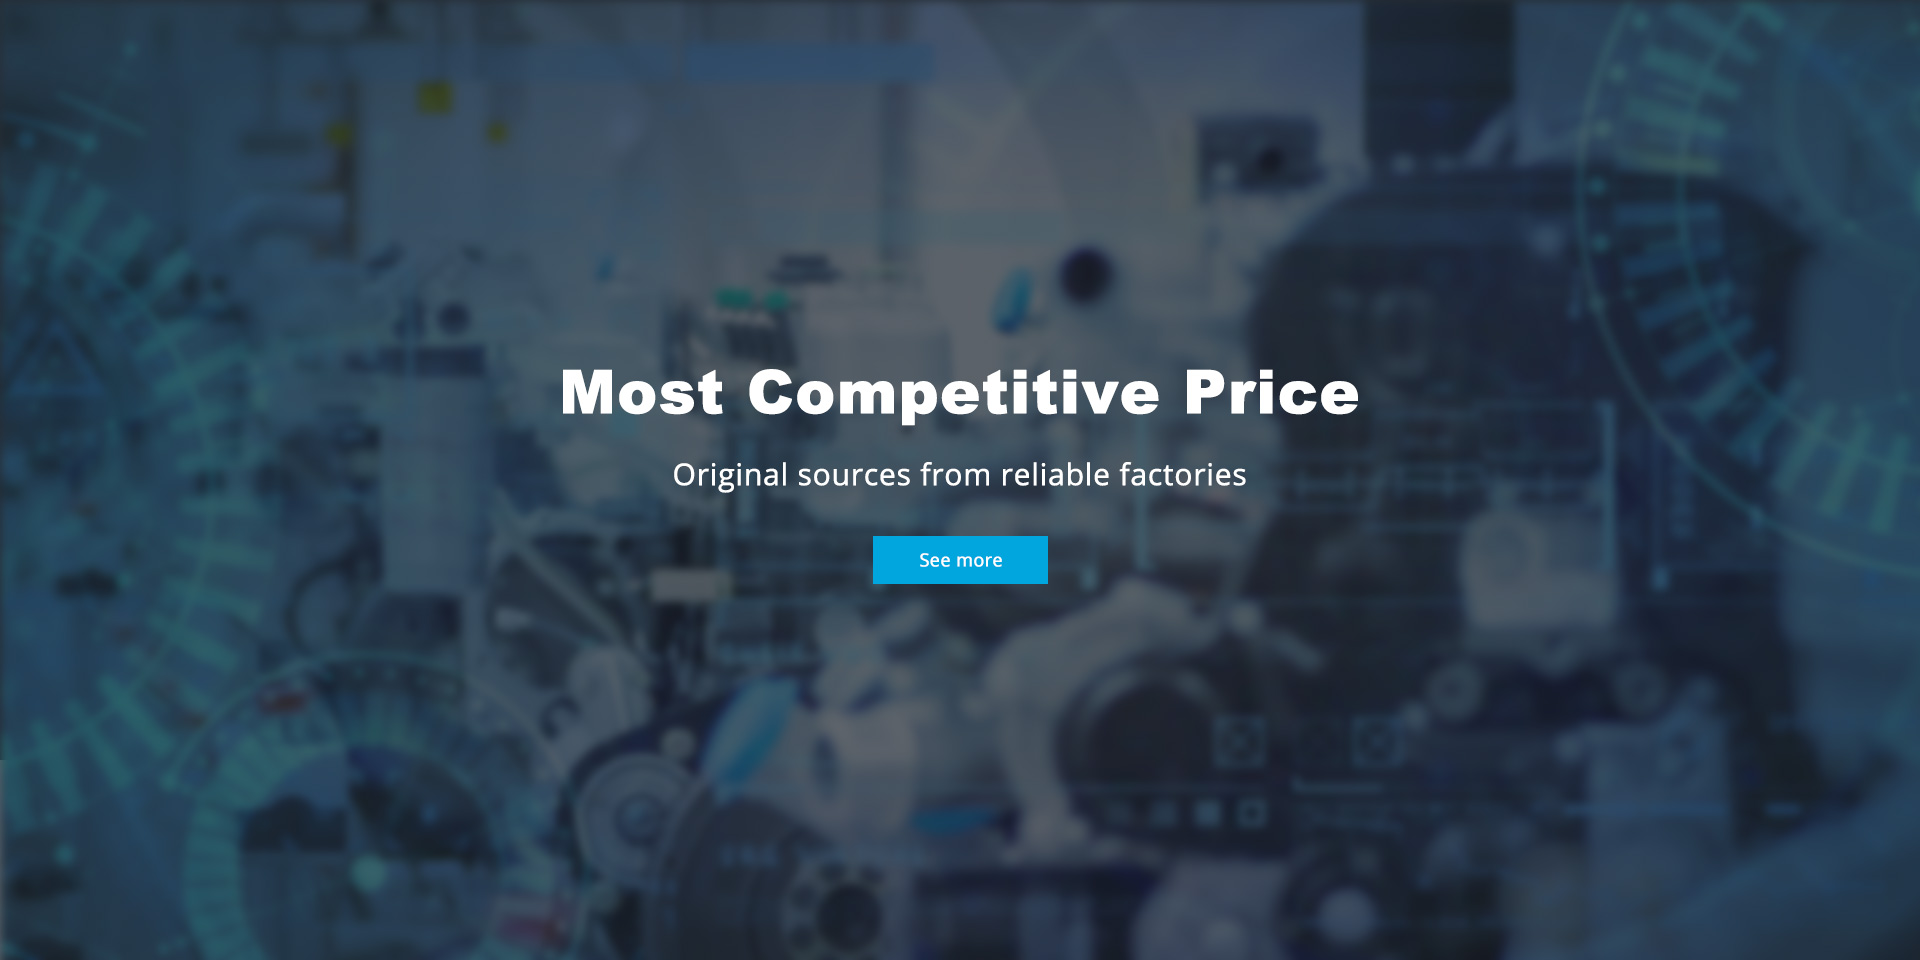 Most Competitive Price